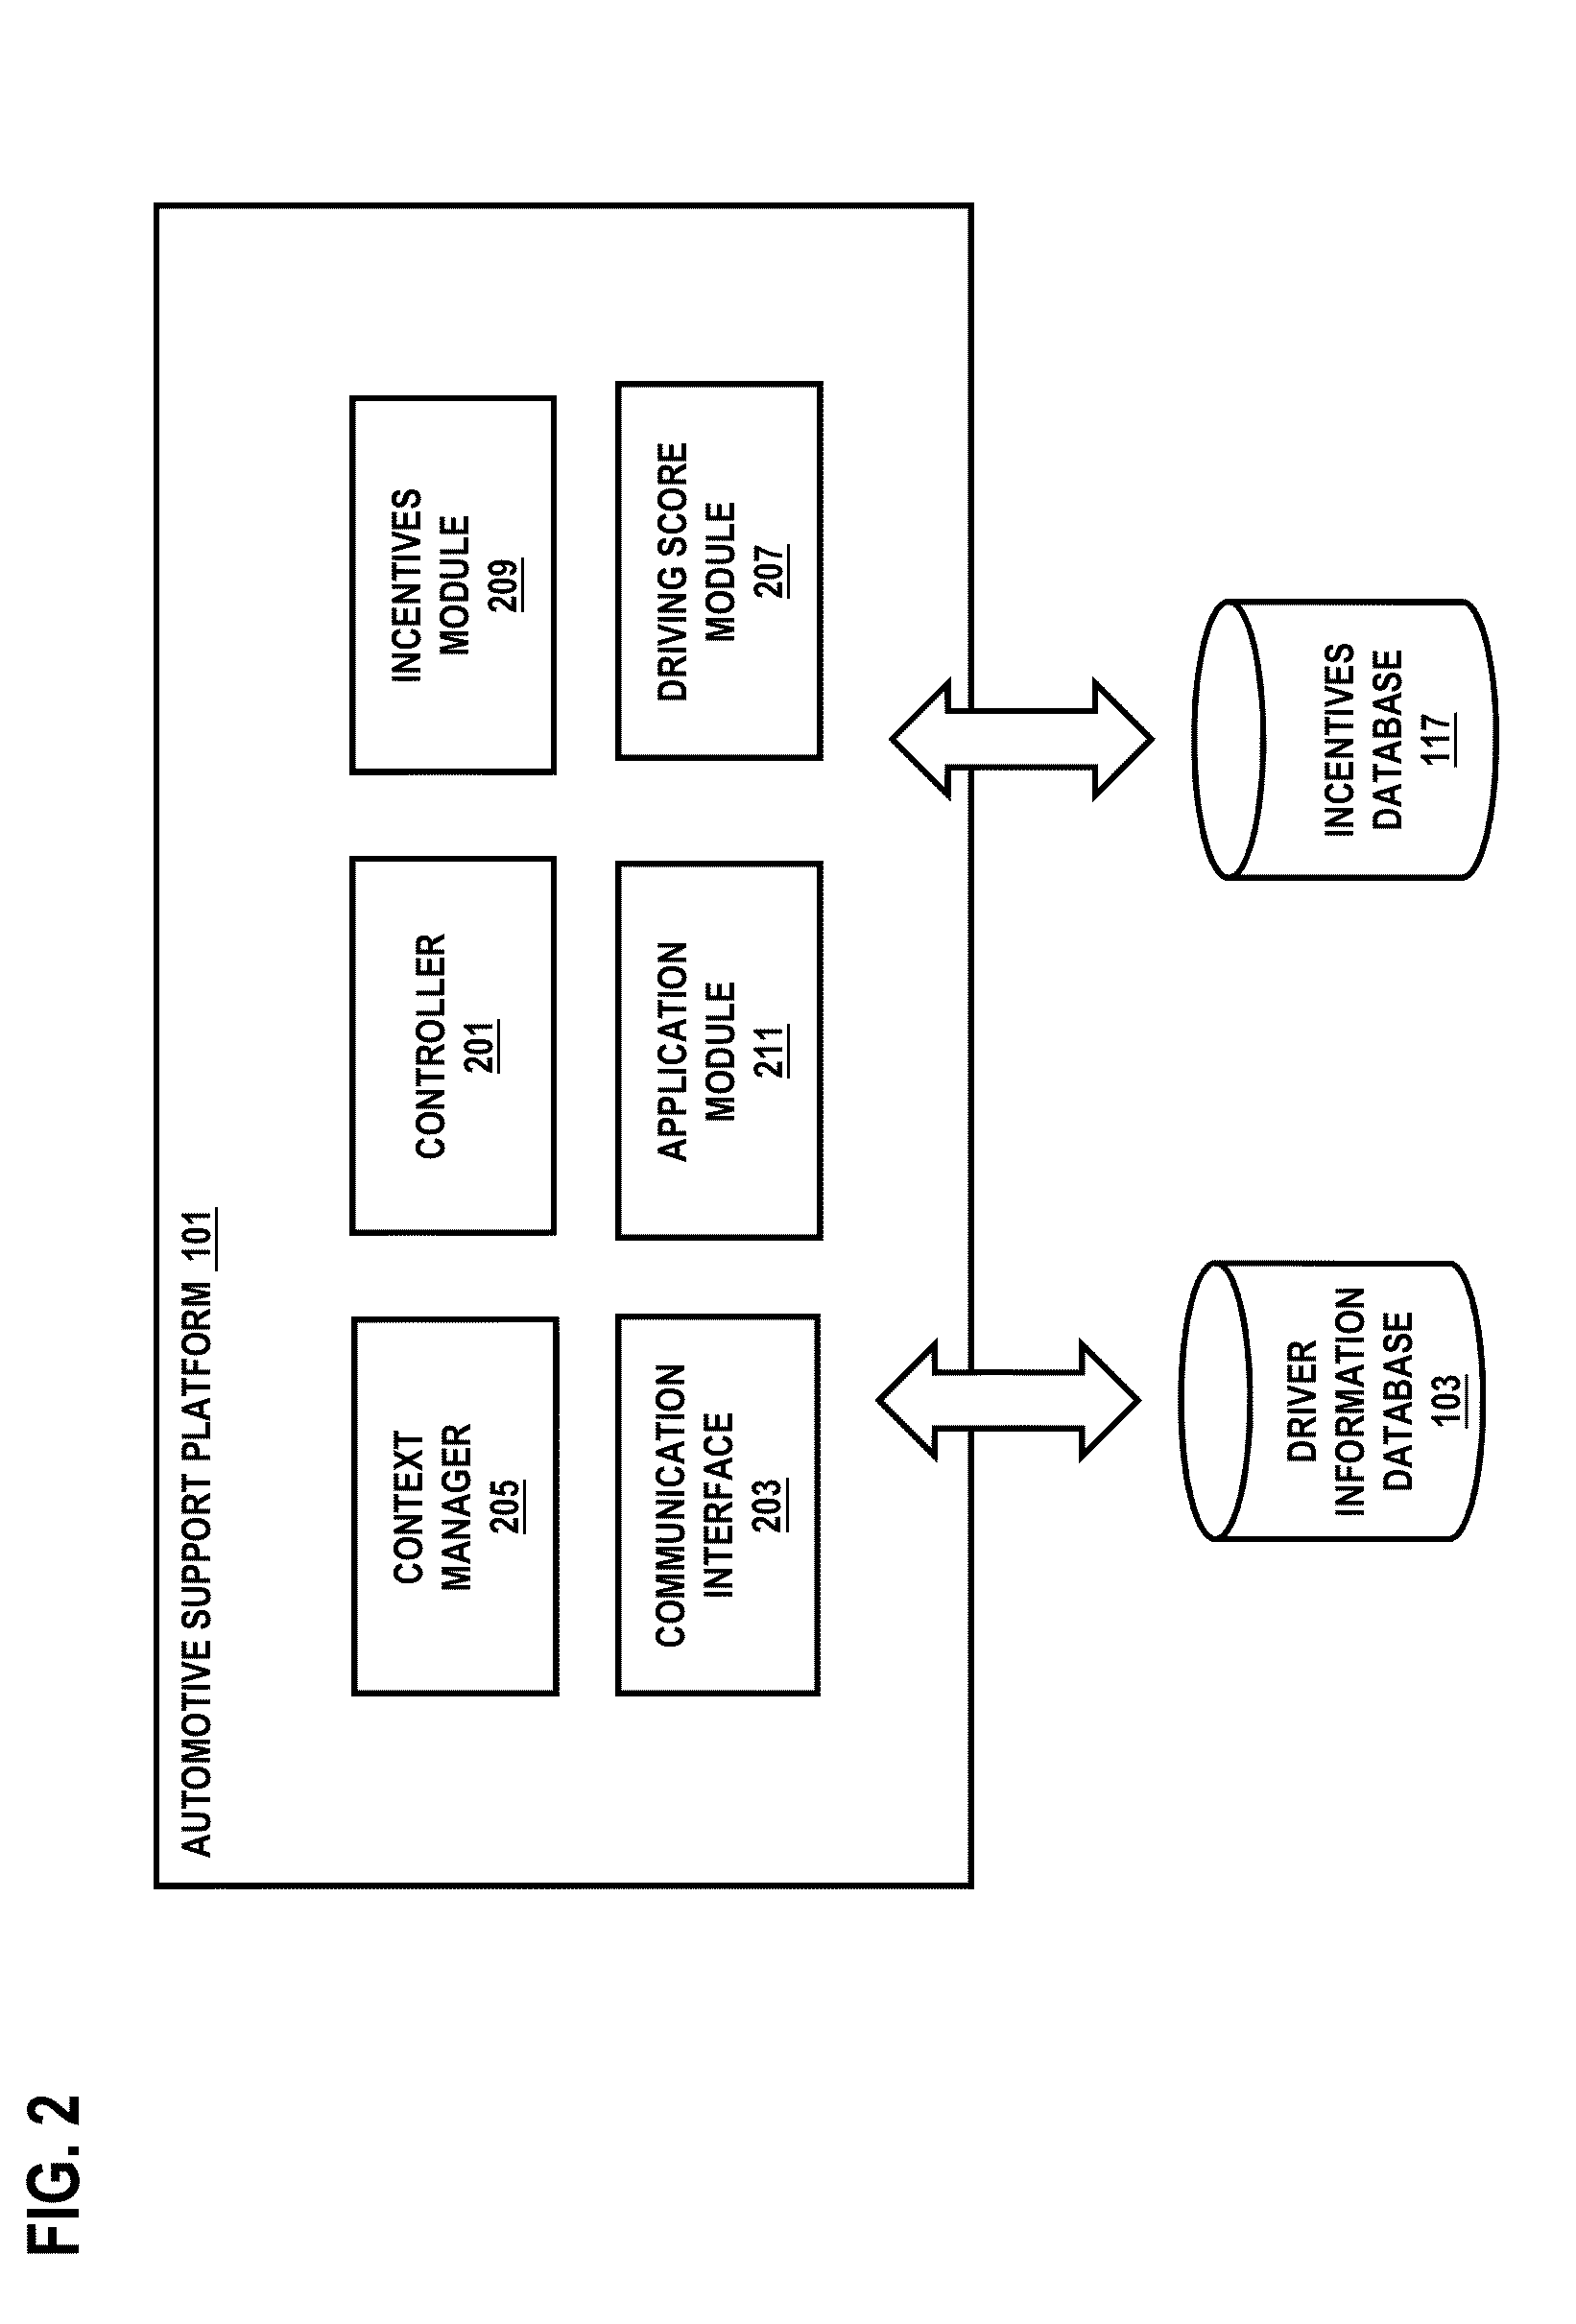 Method and system for providing  driving quality feedback and automotive support